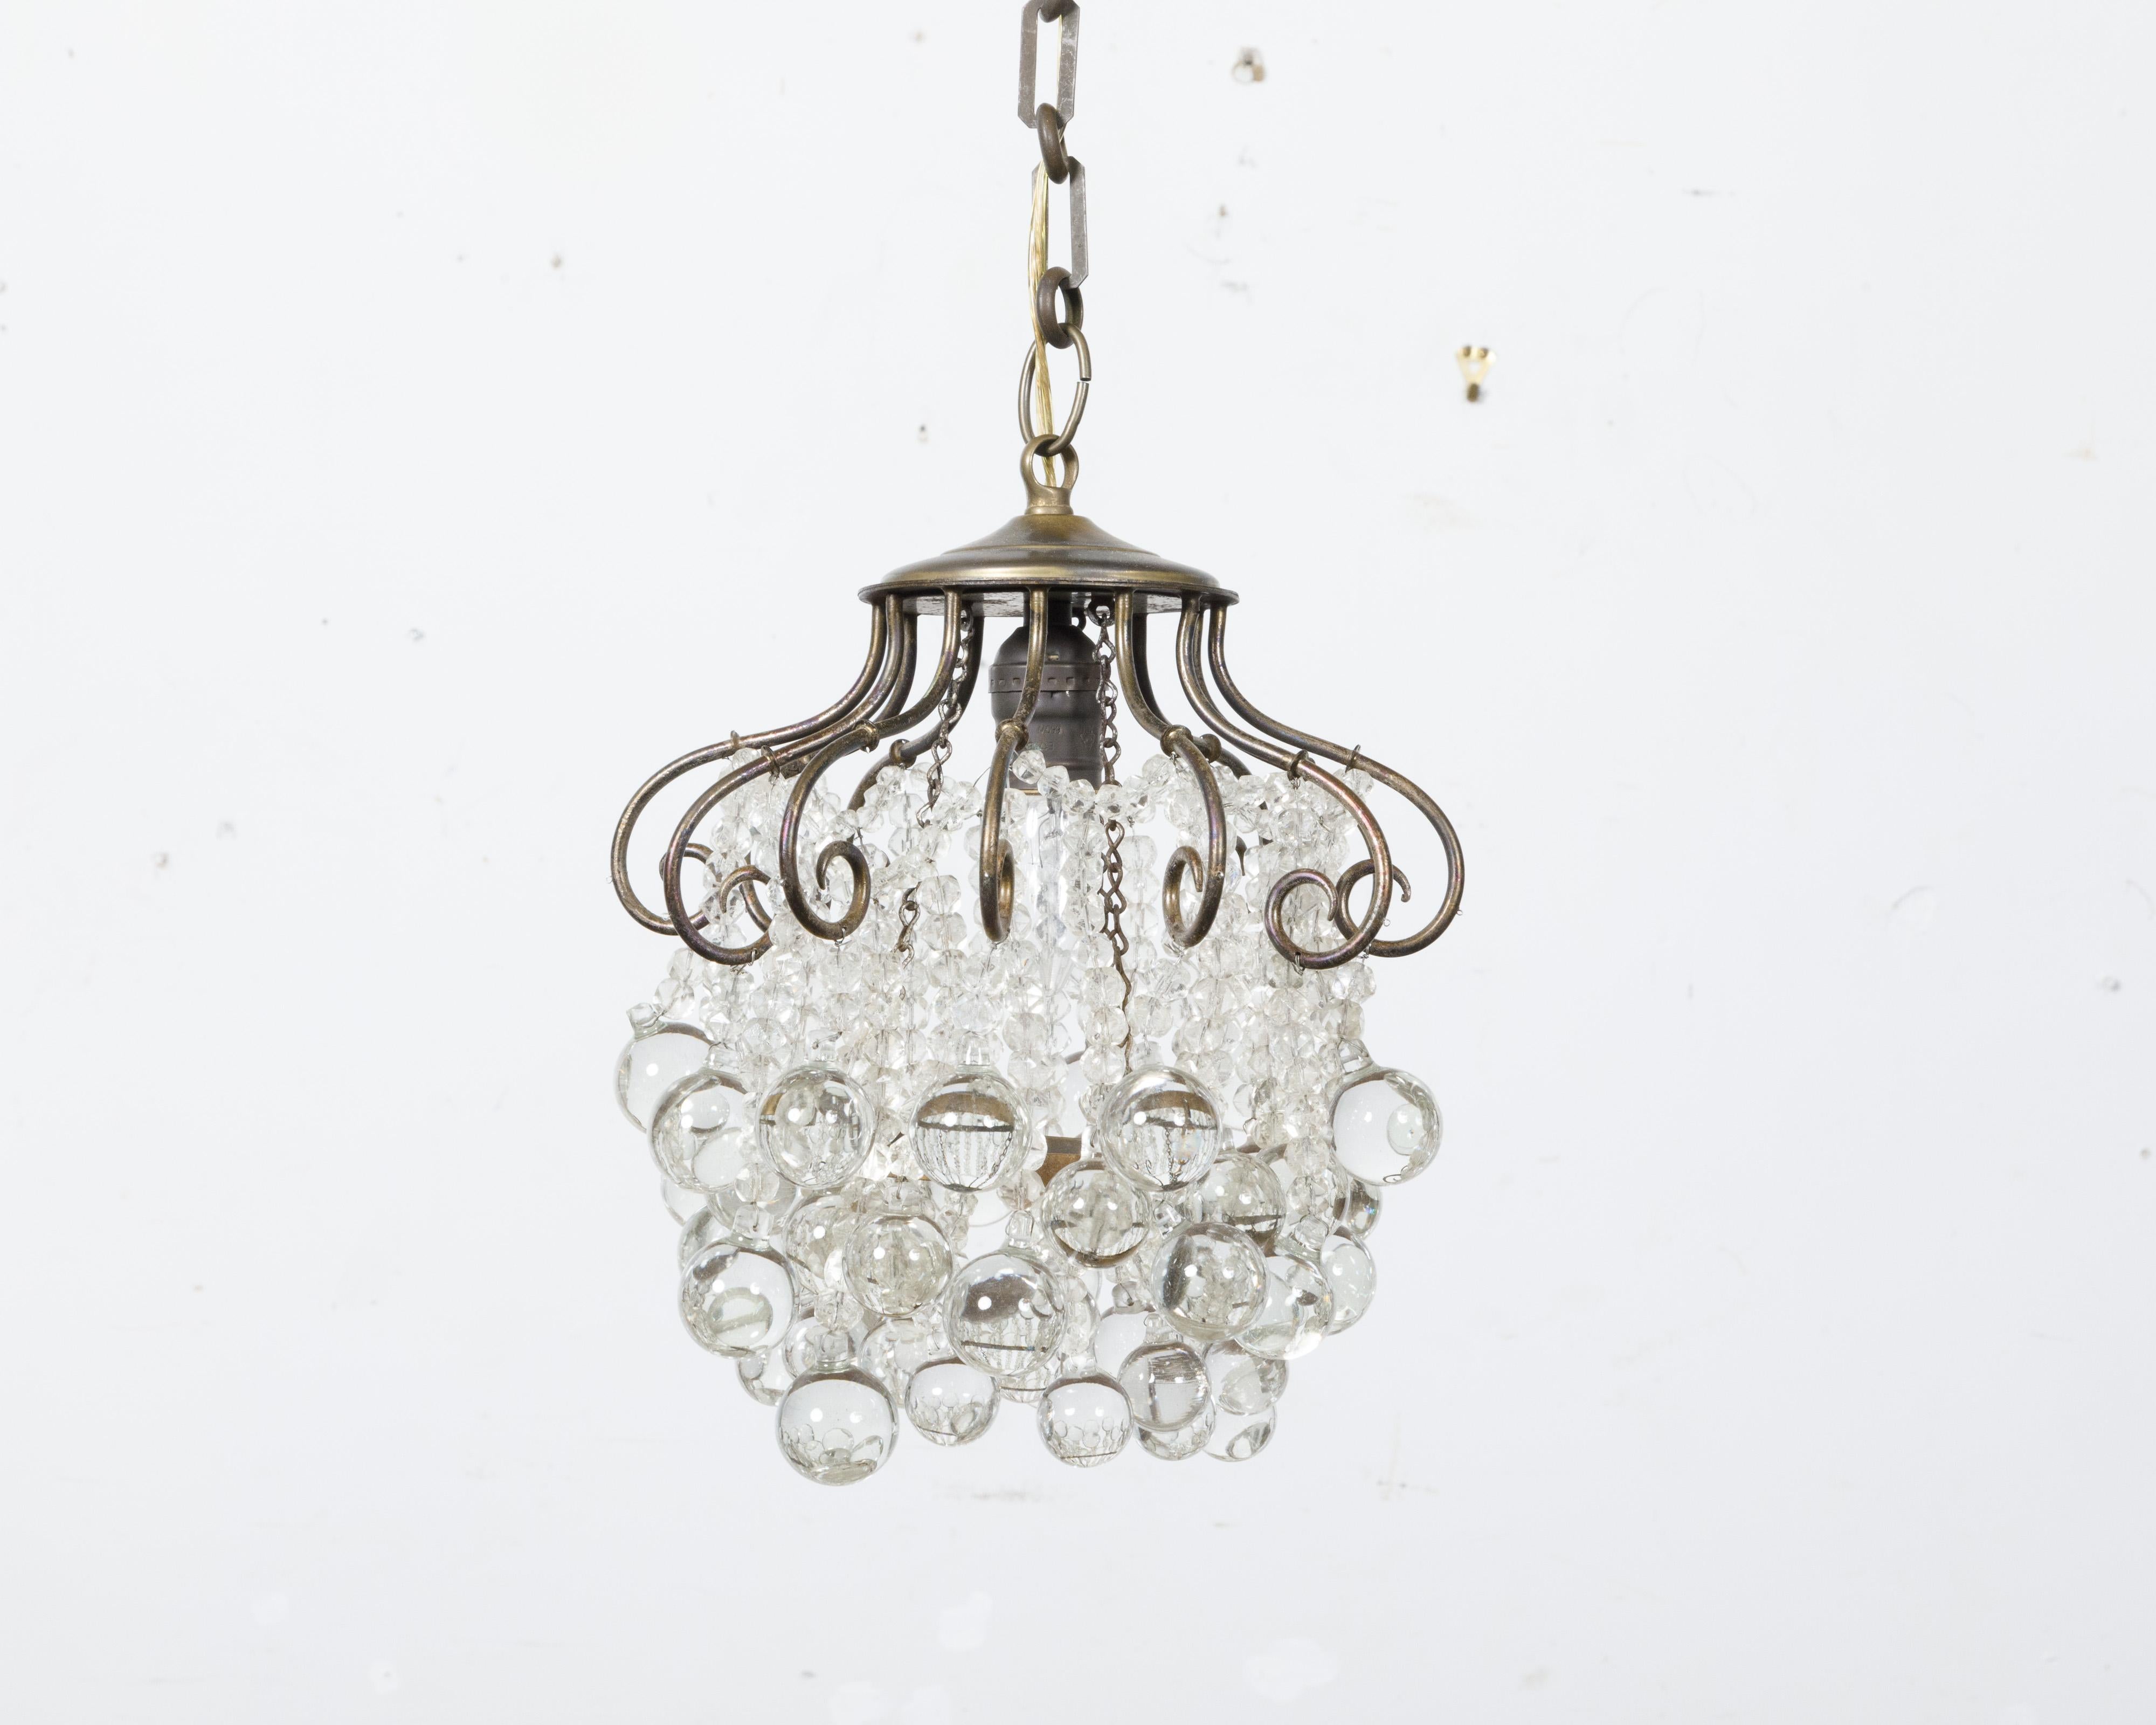 A French crystal chandelier from circa 1920 with cascading crystal curtain and scrolling effects, professionally rewired for the USA. This exquisite French crystal chandelier, dating back to circa 1920, is a stunning example of classic elegance and